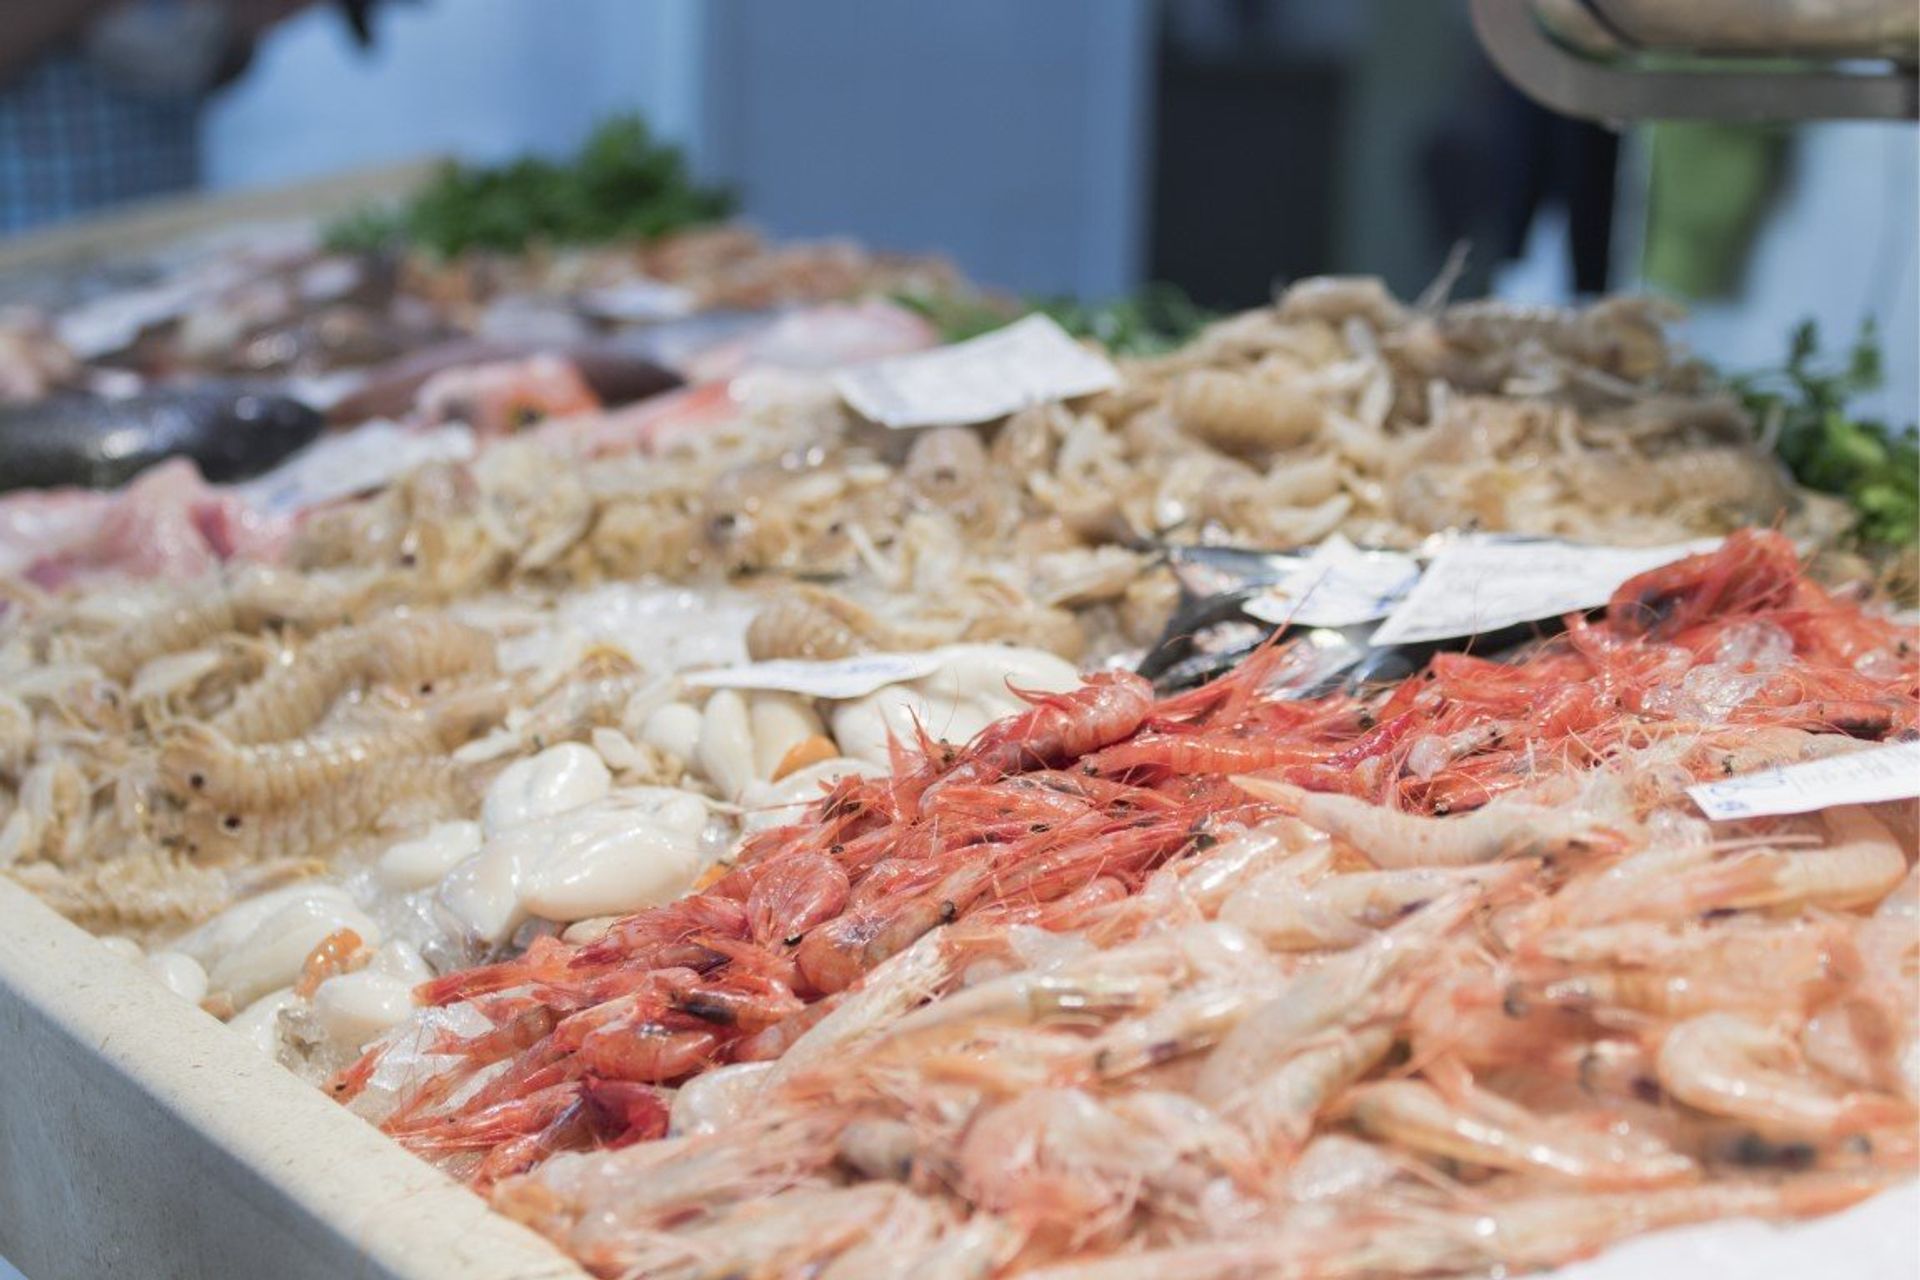 Denia is known for its delicious seafood restaurants and fish market. Watch the catch of the day being brought brought in!